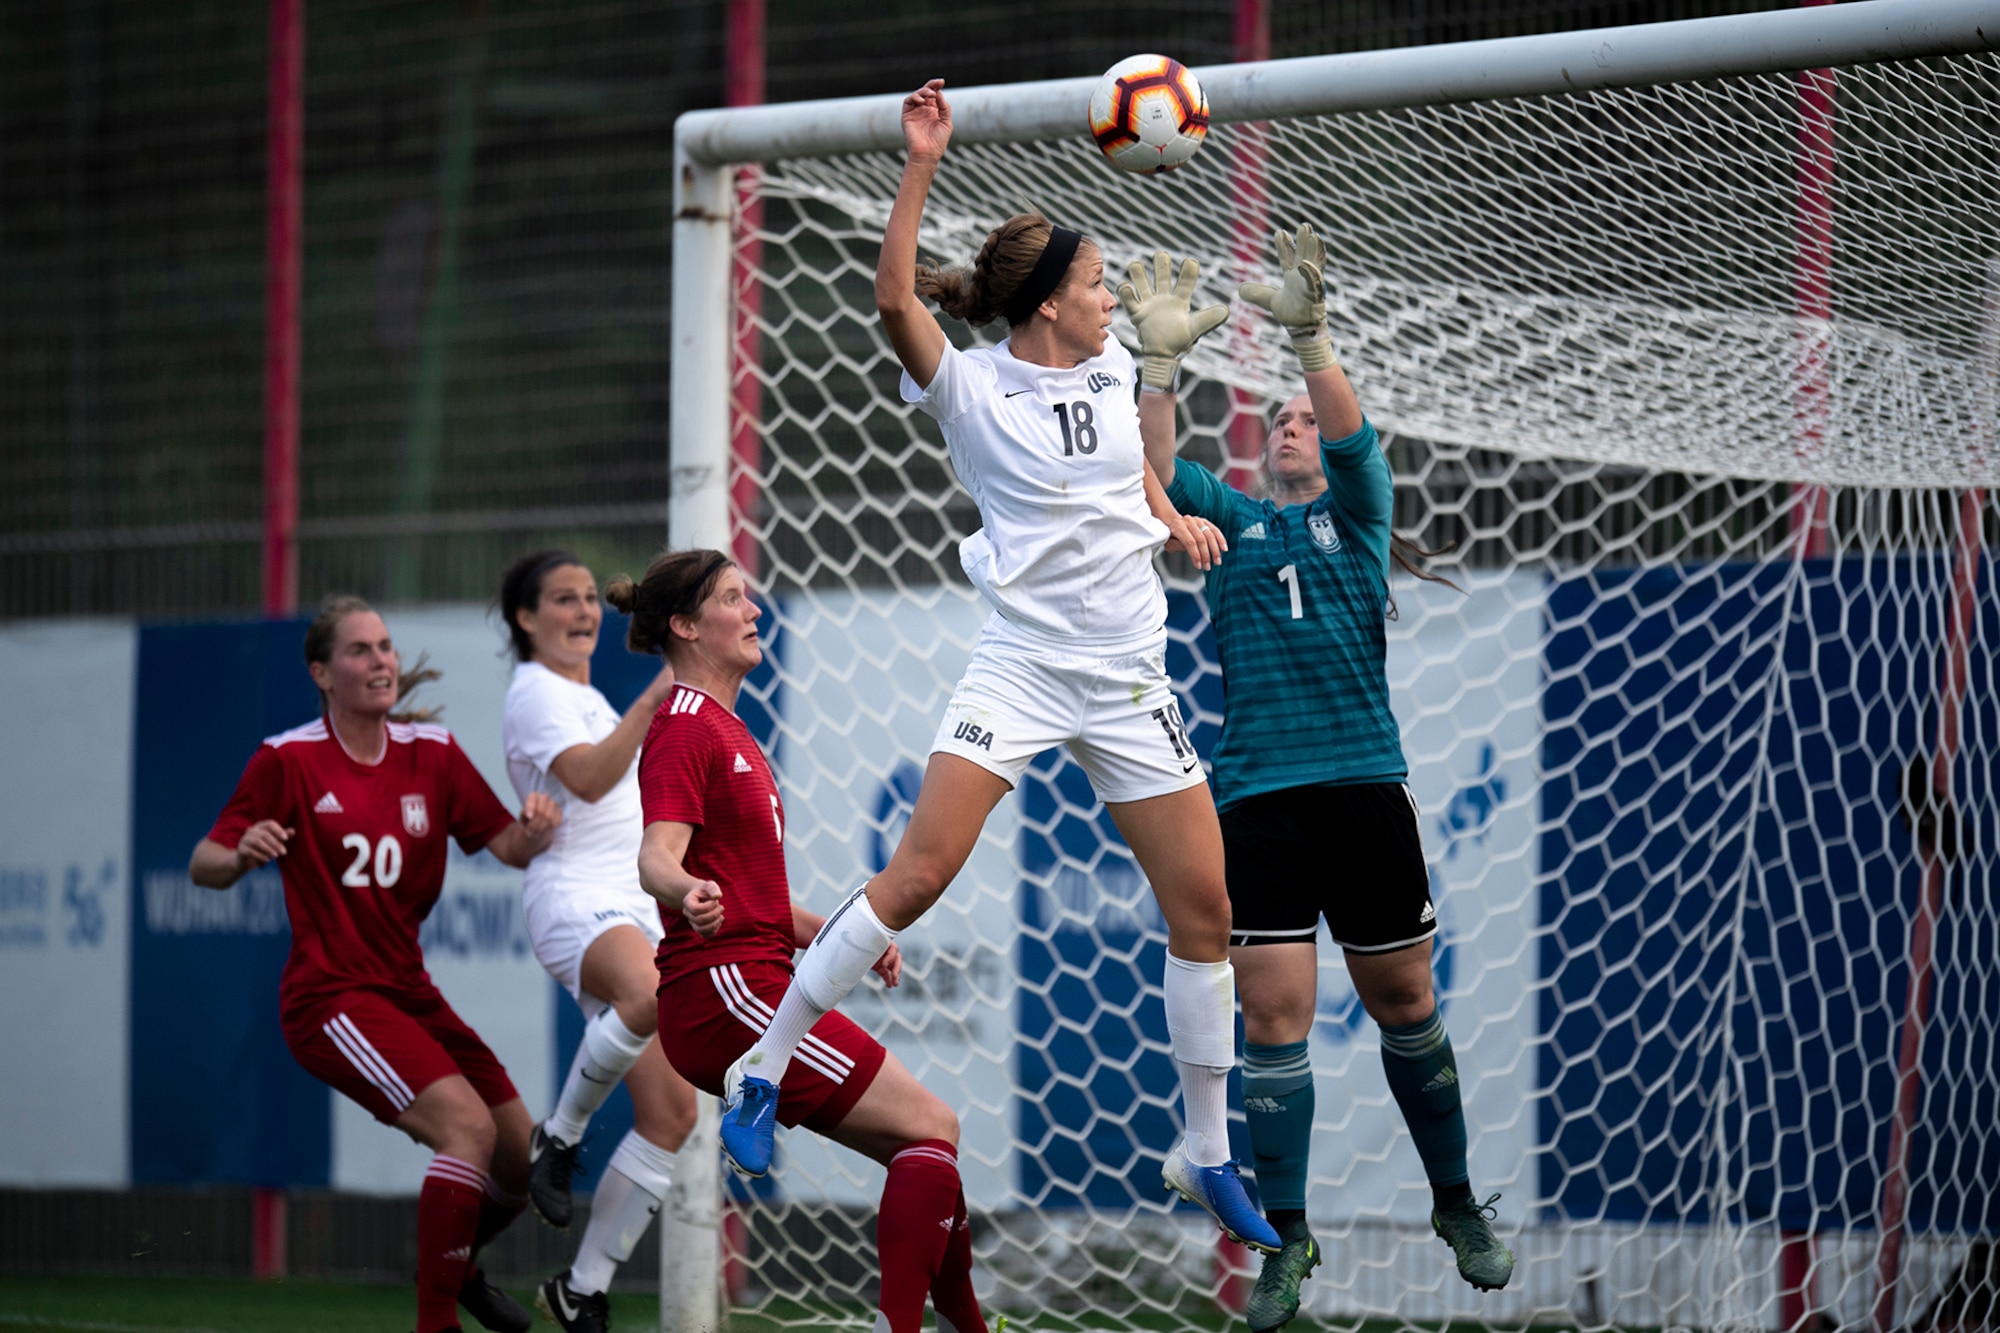 2nd Lt. Morgan Mavroudis, 412th Security Forces Squadron, playing for the U.S. Armed Forces Women’s Soccer team, attempts to score a goal during a preliminary game with Germany in the 2019 CISM Military World Games in Wuhan, China Oct. 17, 2019. The Council of International Sports for the Military games open Oct. 18, 2019 and close Oct. 28, 2019. (Photo courtesy of EJ Hersom, U.S. Armed Forces Sports)